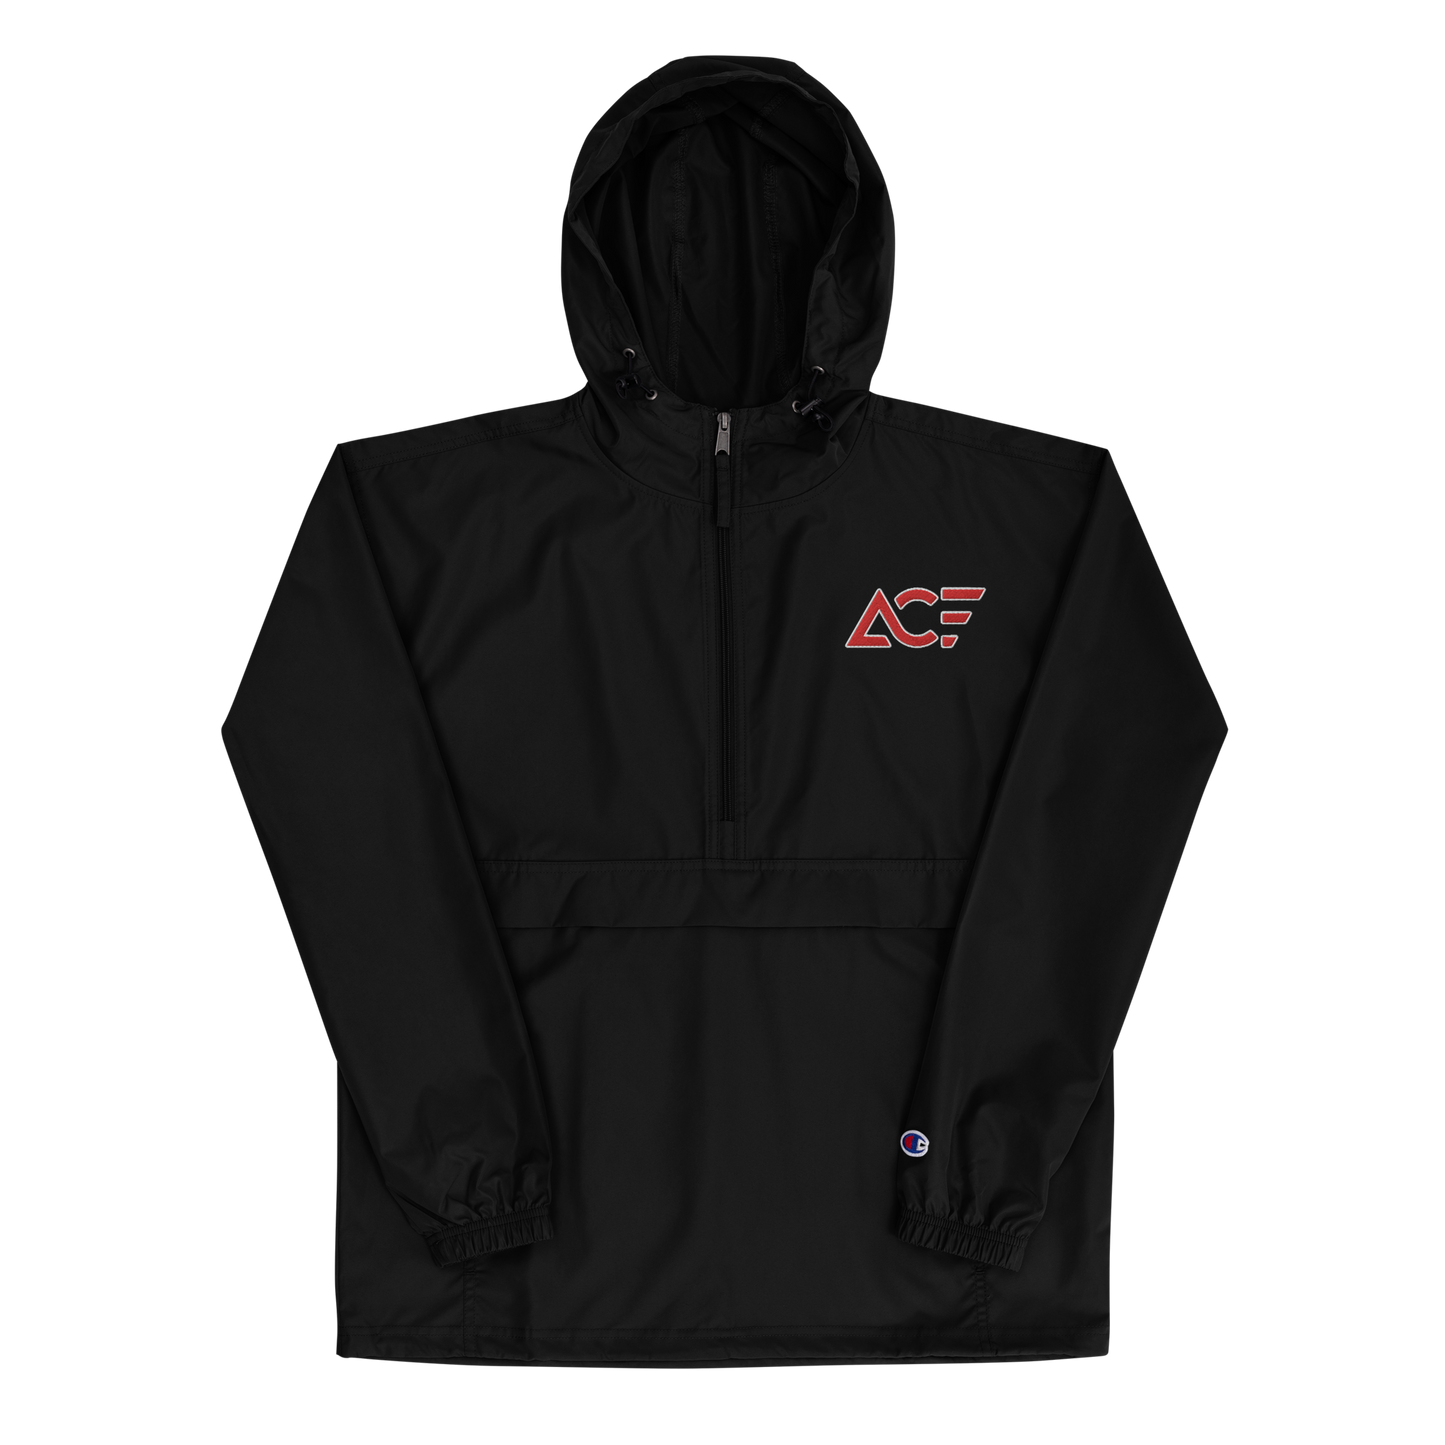 ACE EMBROIDERED CHAMPION JACKET